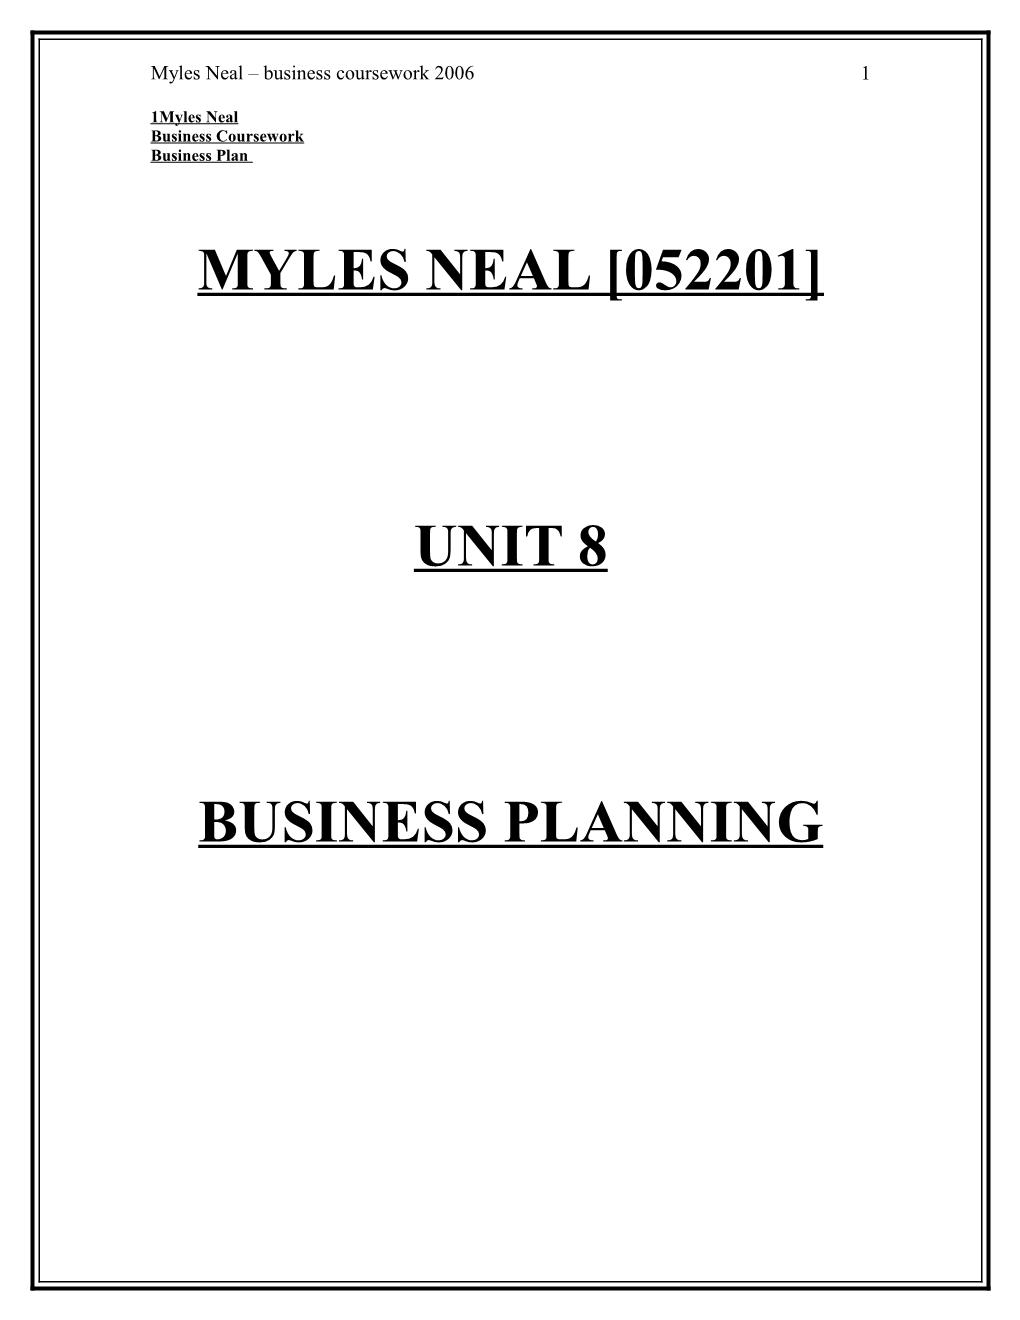 Myles Neal Business Coursework 2006